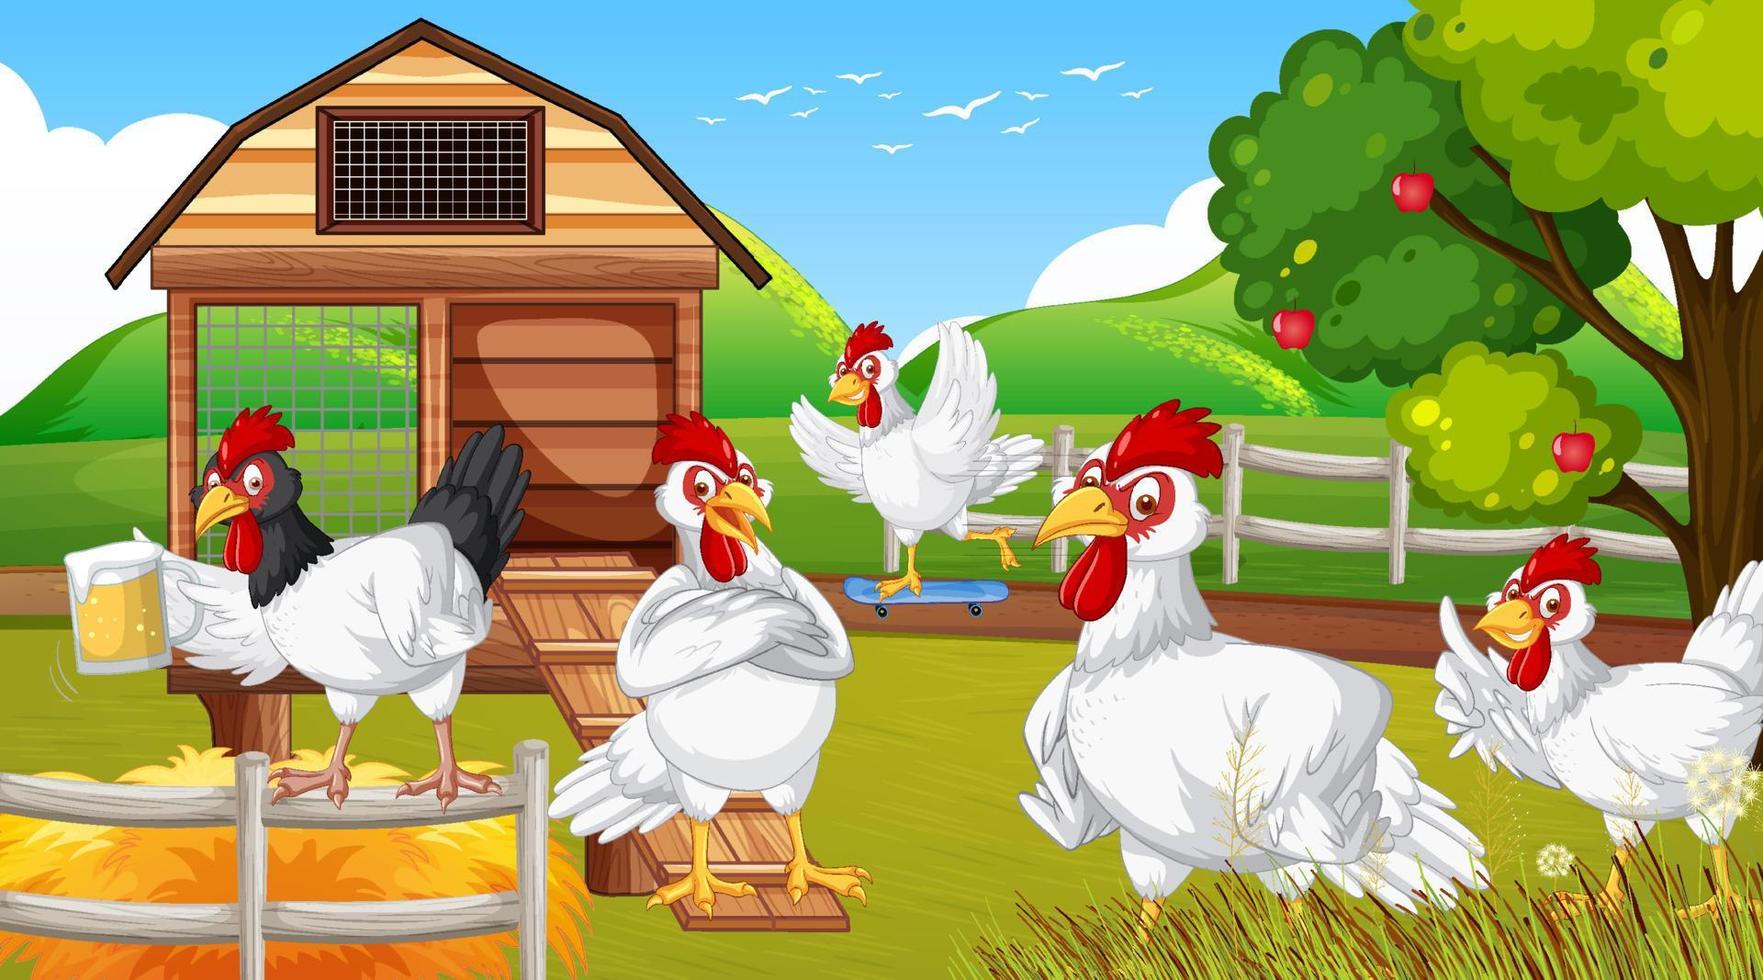 Chickens cartoon characters in nature farm scene vector